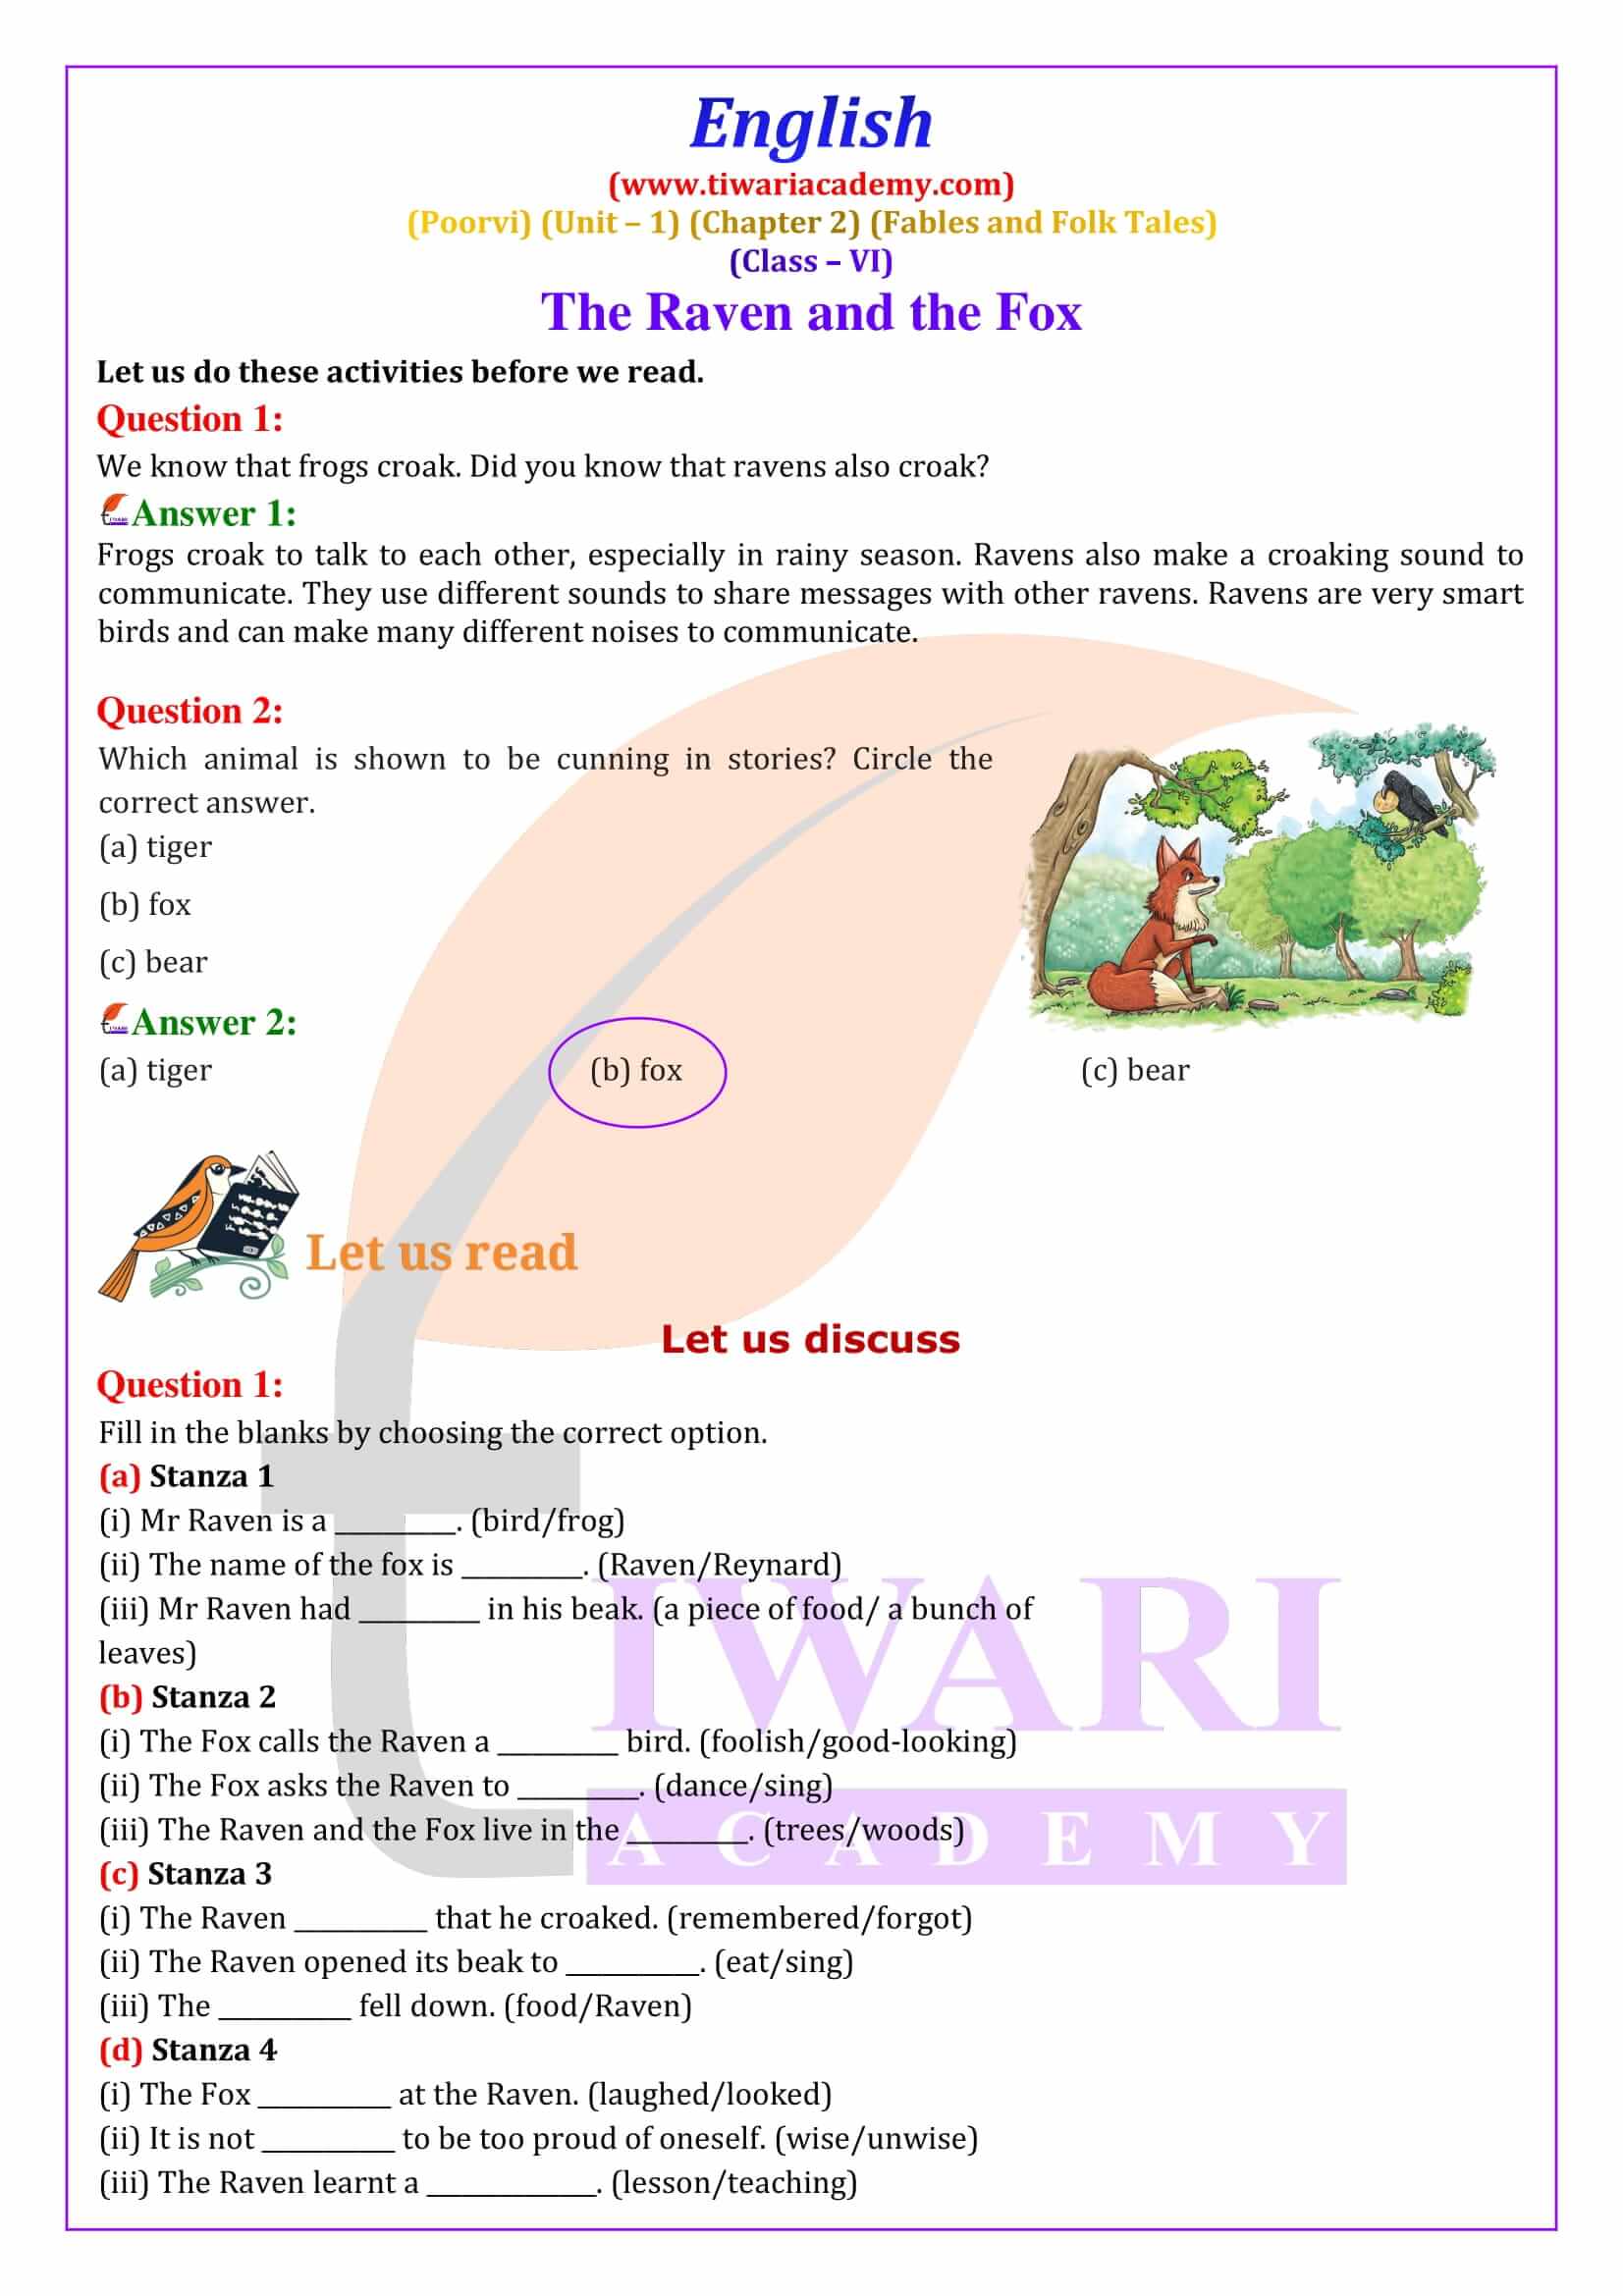 NCERT Solutions for Class 6 English Poorvi Unit 1 Fables and Folk Tales A Bottle of Chapter 2 The Raven and the Fox